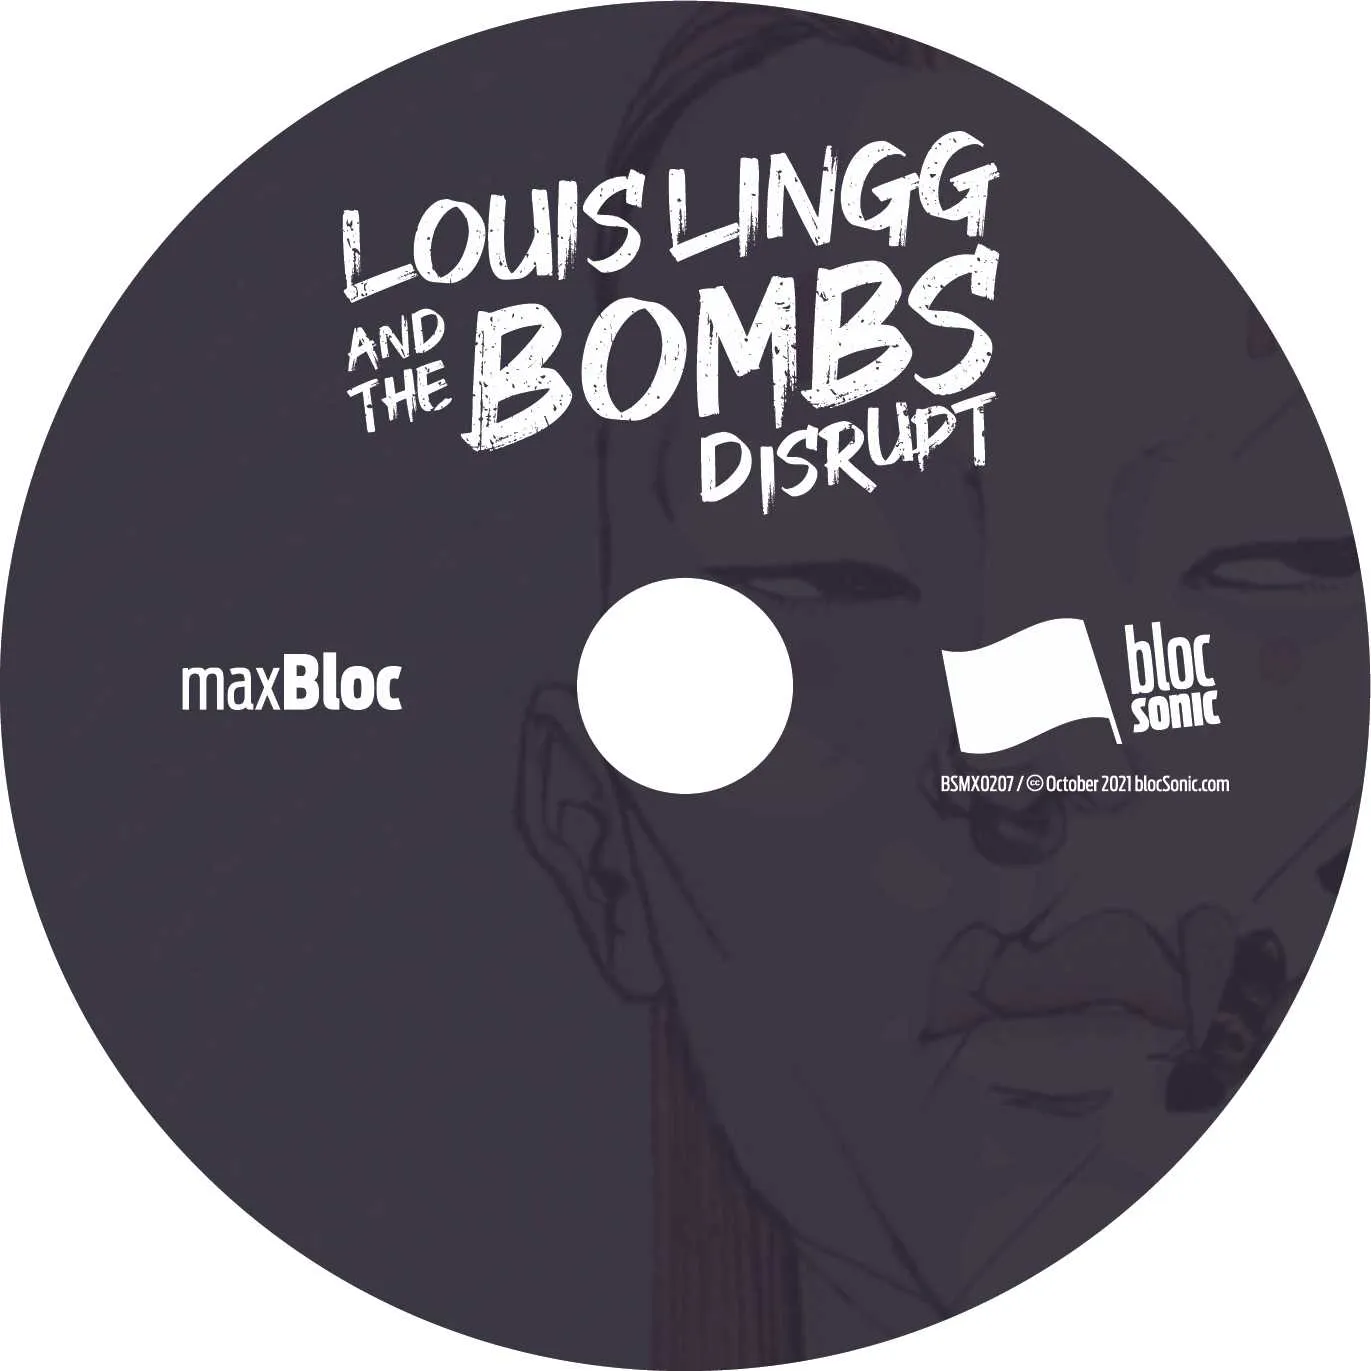 Album disc for “Disrupt” by Louis Lingg and The Bombs